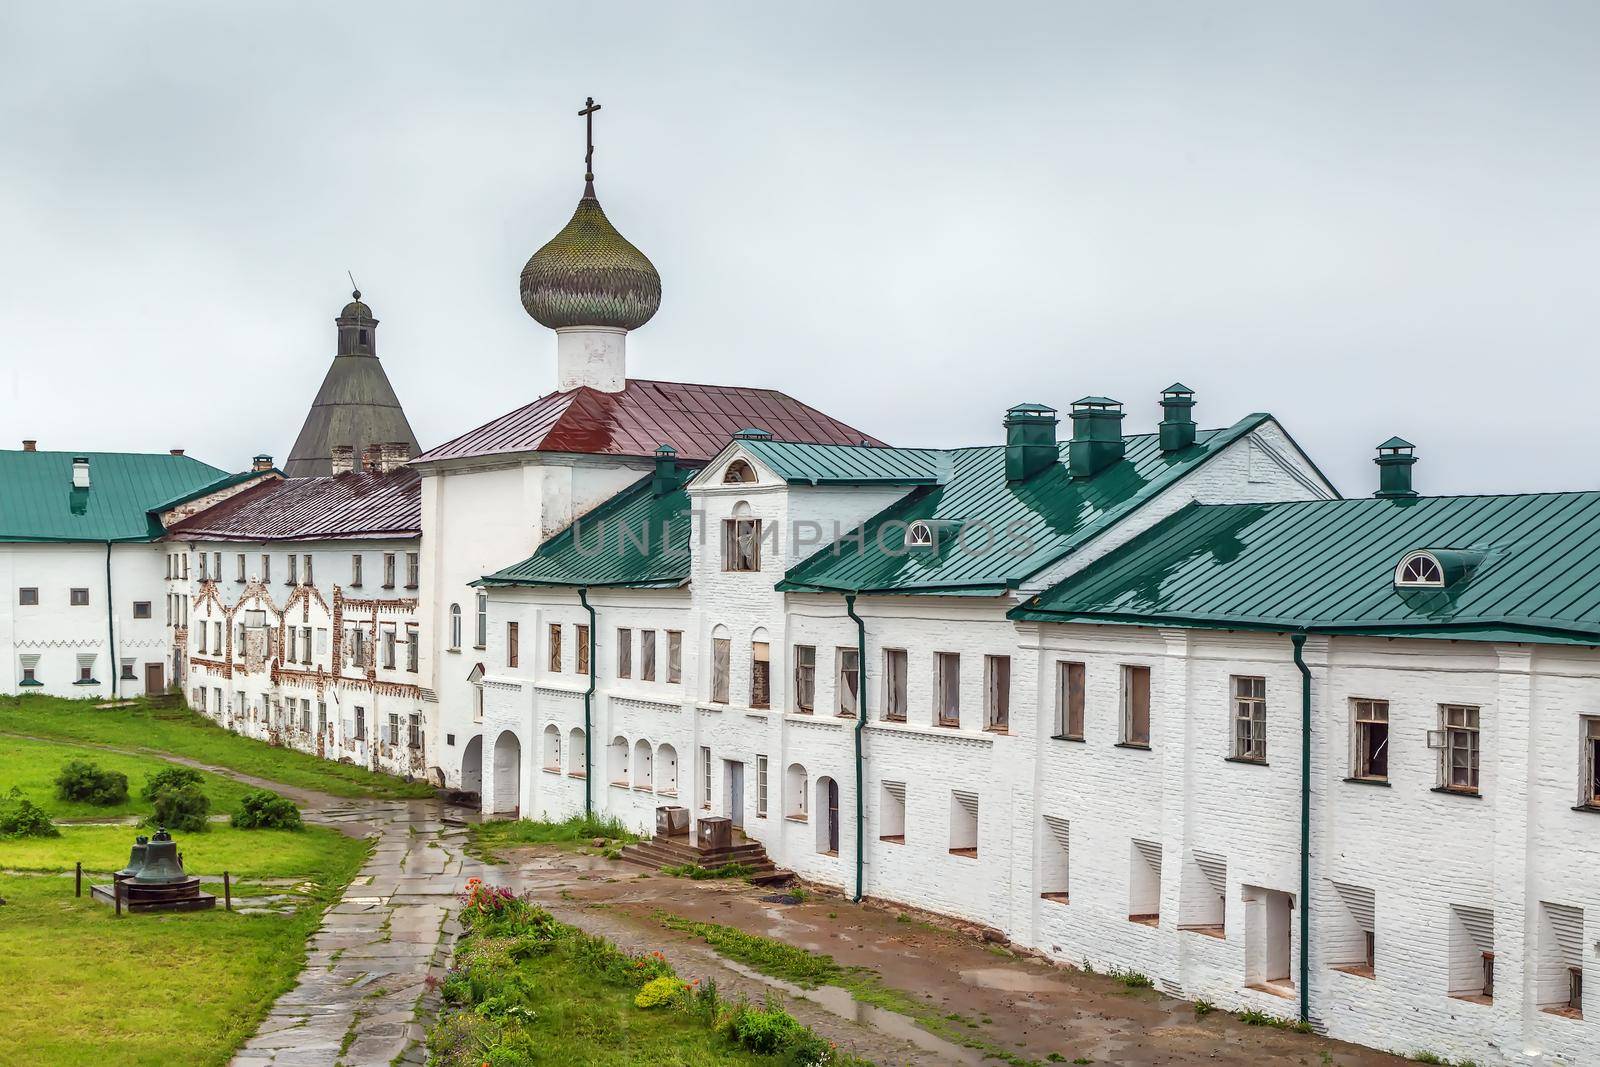 Solovetsky Monastery is a fortified monastery located on the Solovetsky Islands in the White Sea, Russia. The Gateway Church of the Annunciation